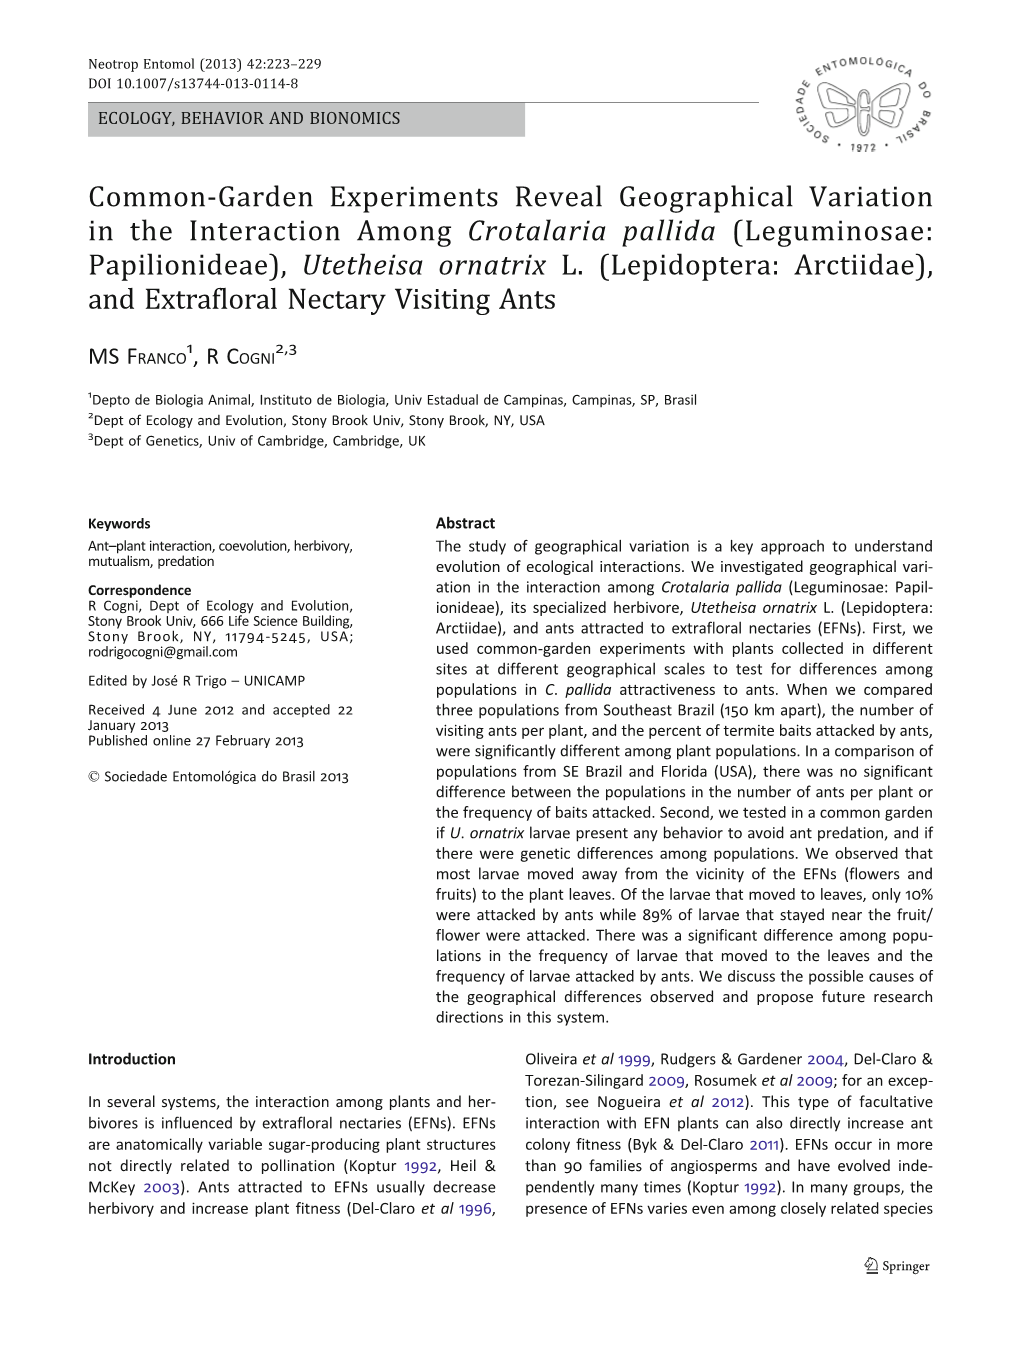 Common-Garden Experiments Reveal Geographical Variation in the Interaction Among Crotalaria Pallida (Leguminosae: Papilionideae), Utetheisa Ornatrix L